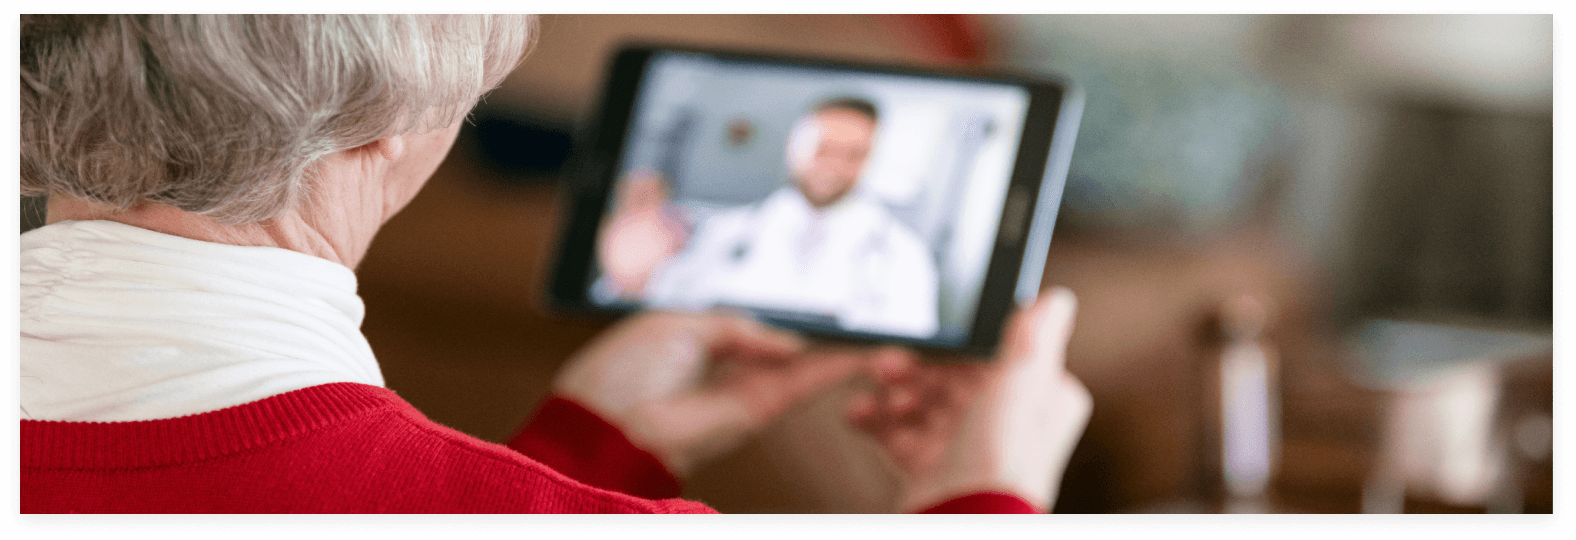 COPD, CHF, or hypertension patient looking at a tablet for a virtual telehealth visit